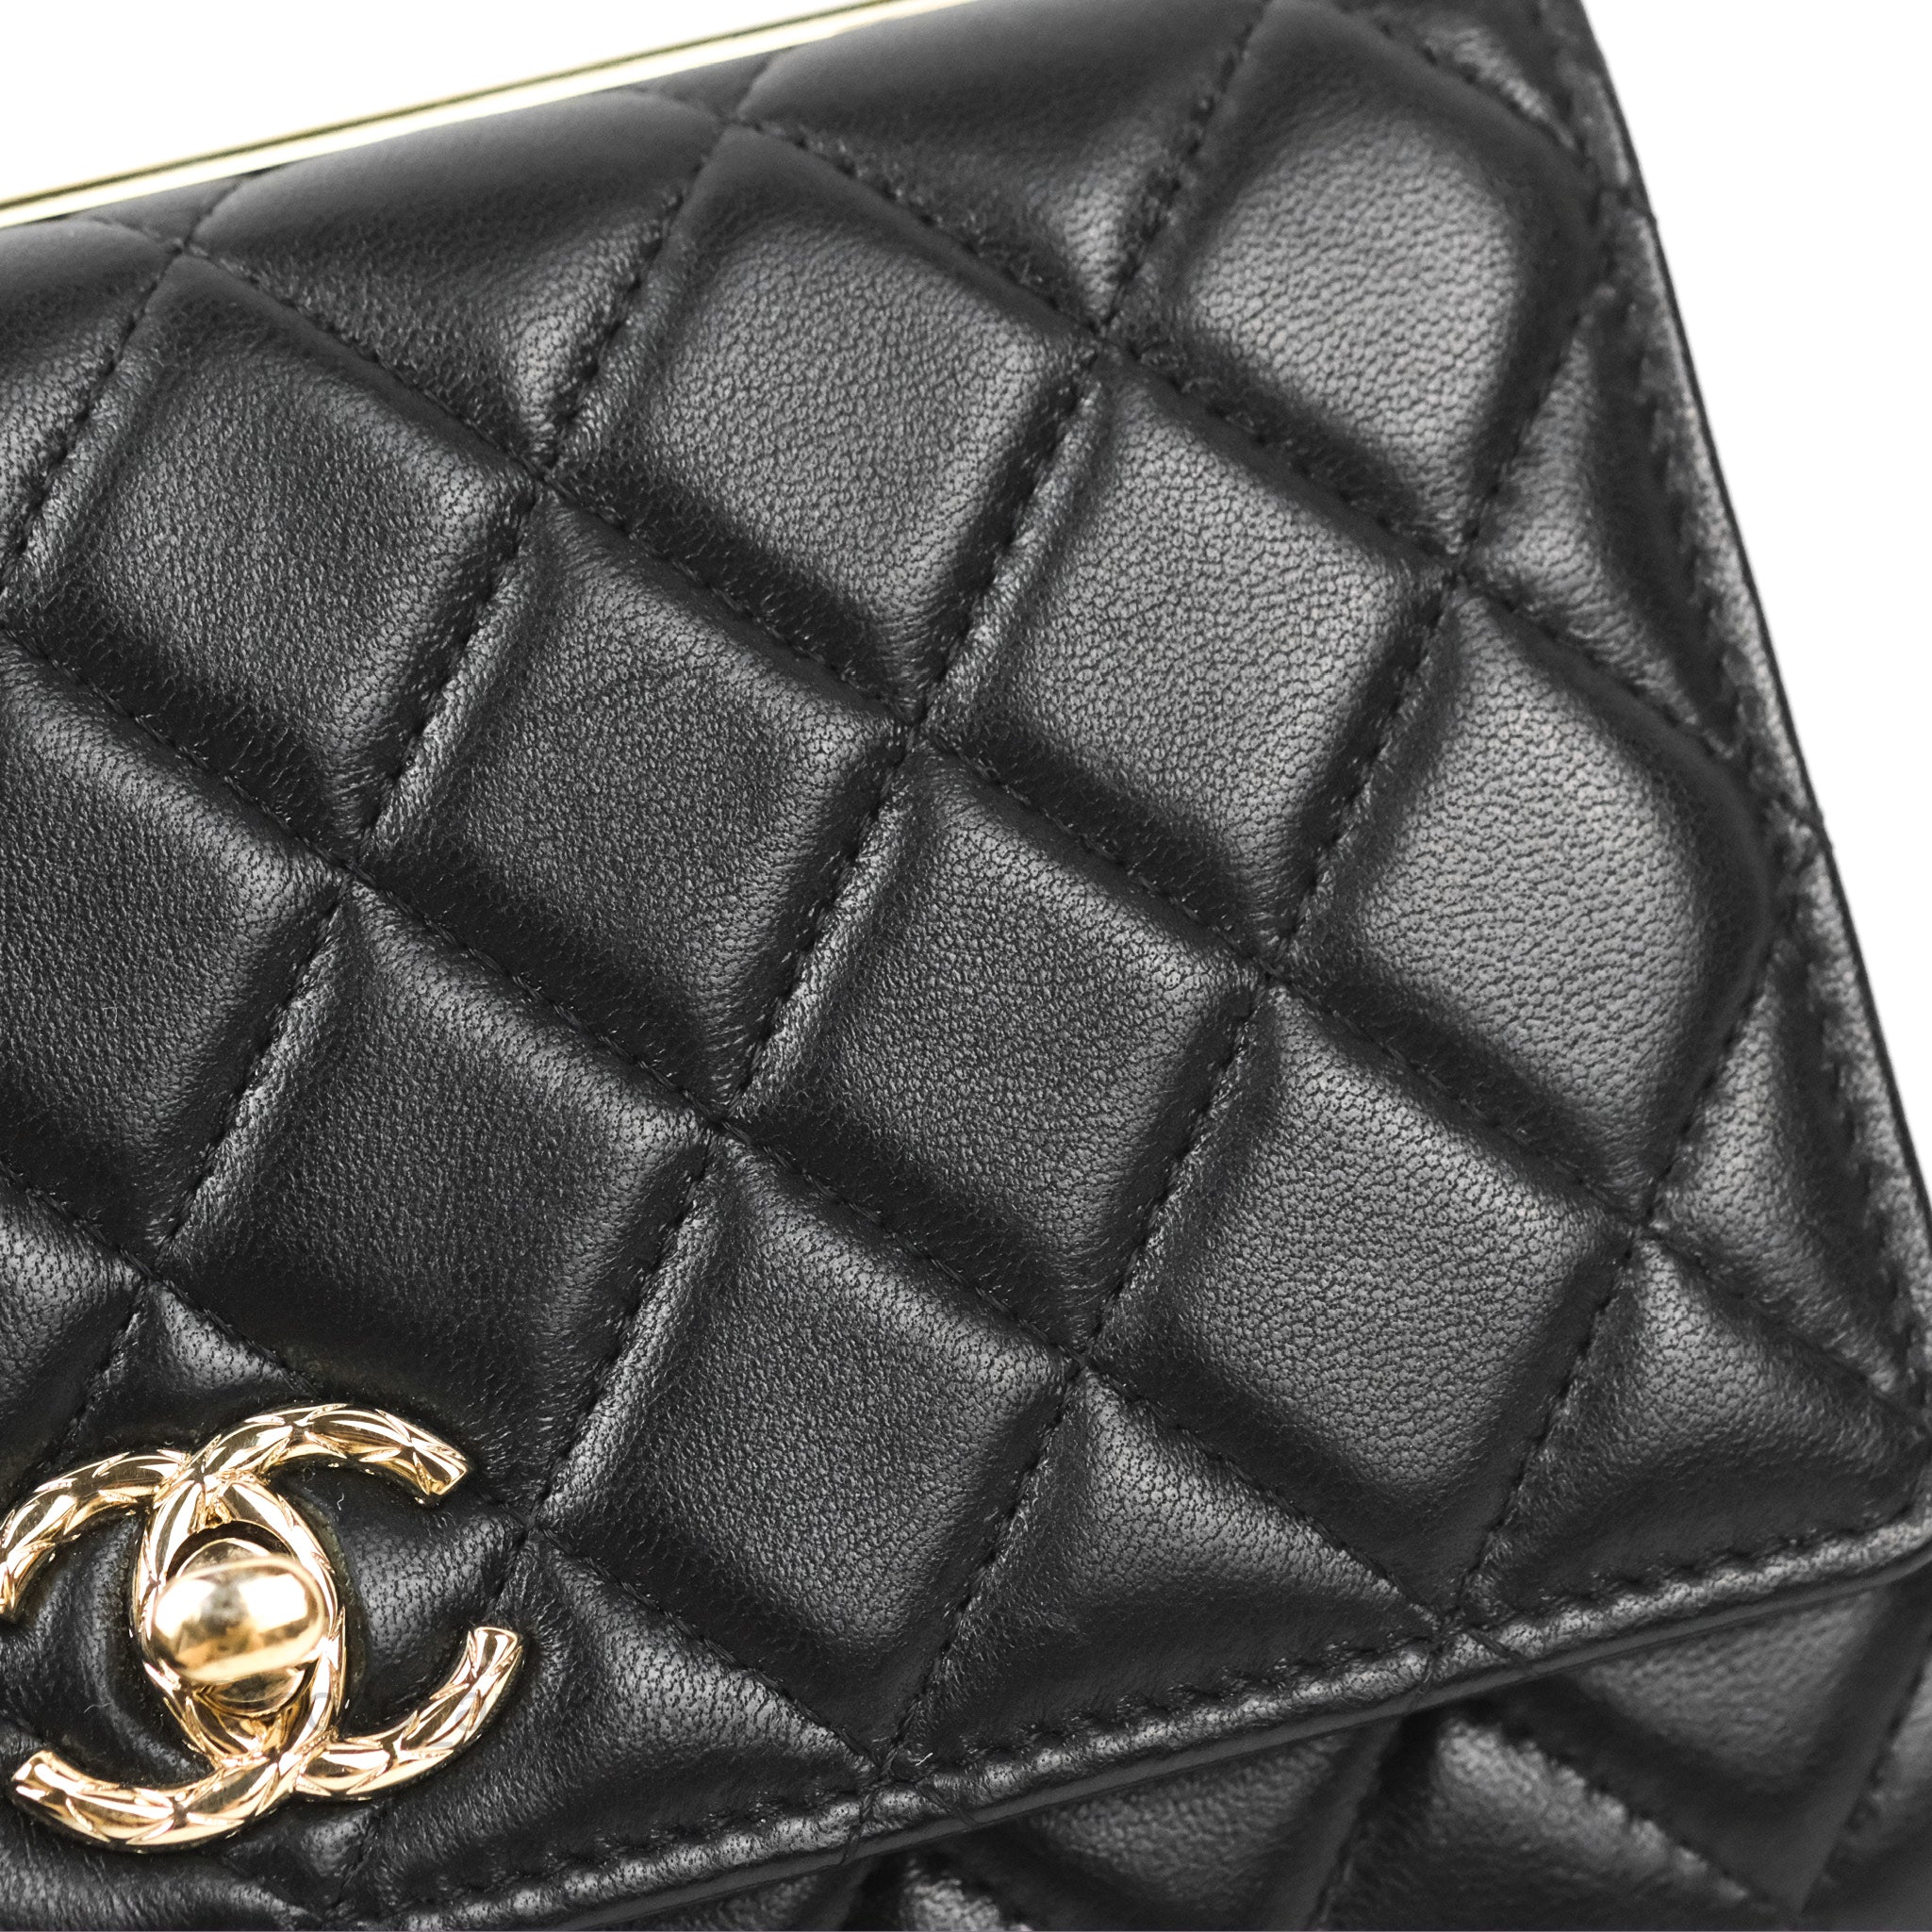 Chanel Quilted Yen Wallet Black Caviar Gold Hardware – Coco Approved Studio